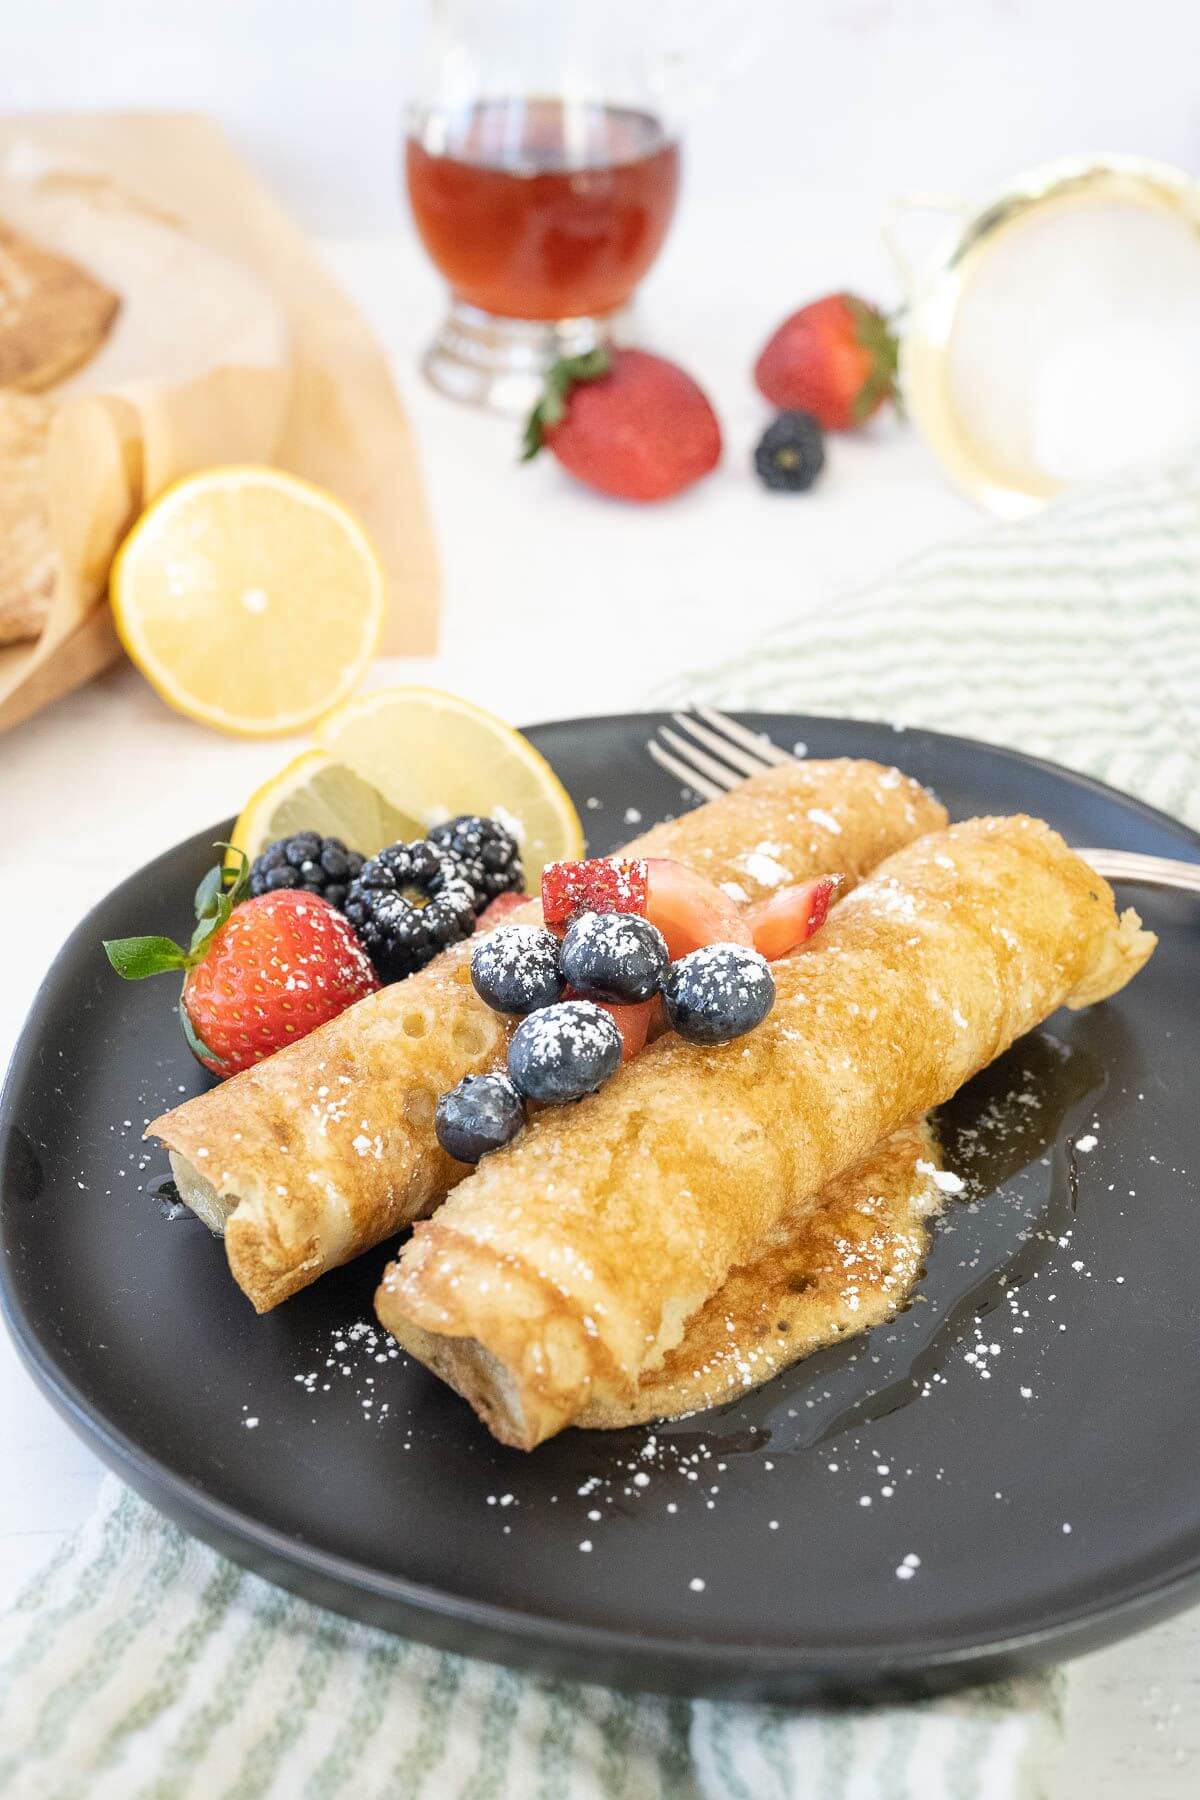 A black plate holds two rolled up pancakes with blueberries, blackberries, and strawberries.